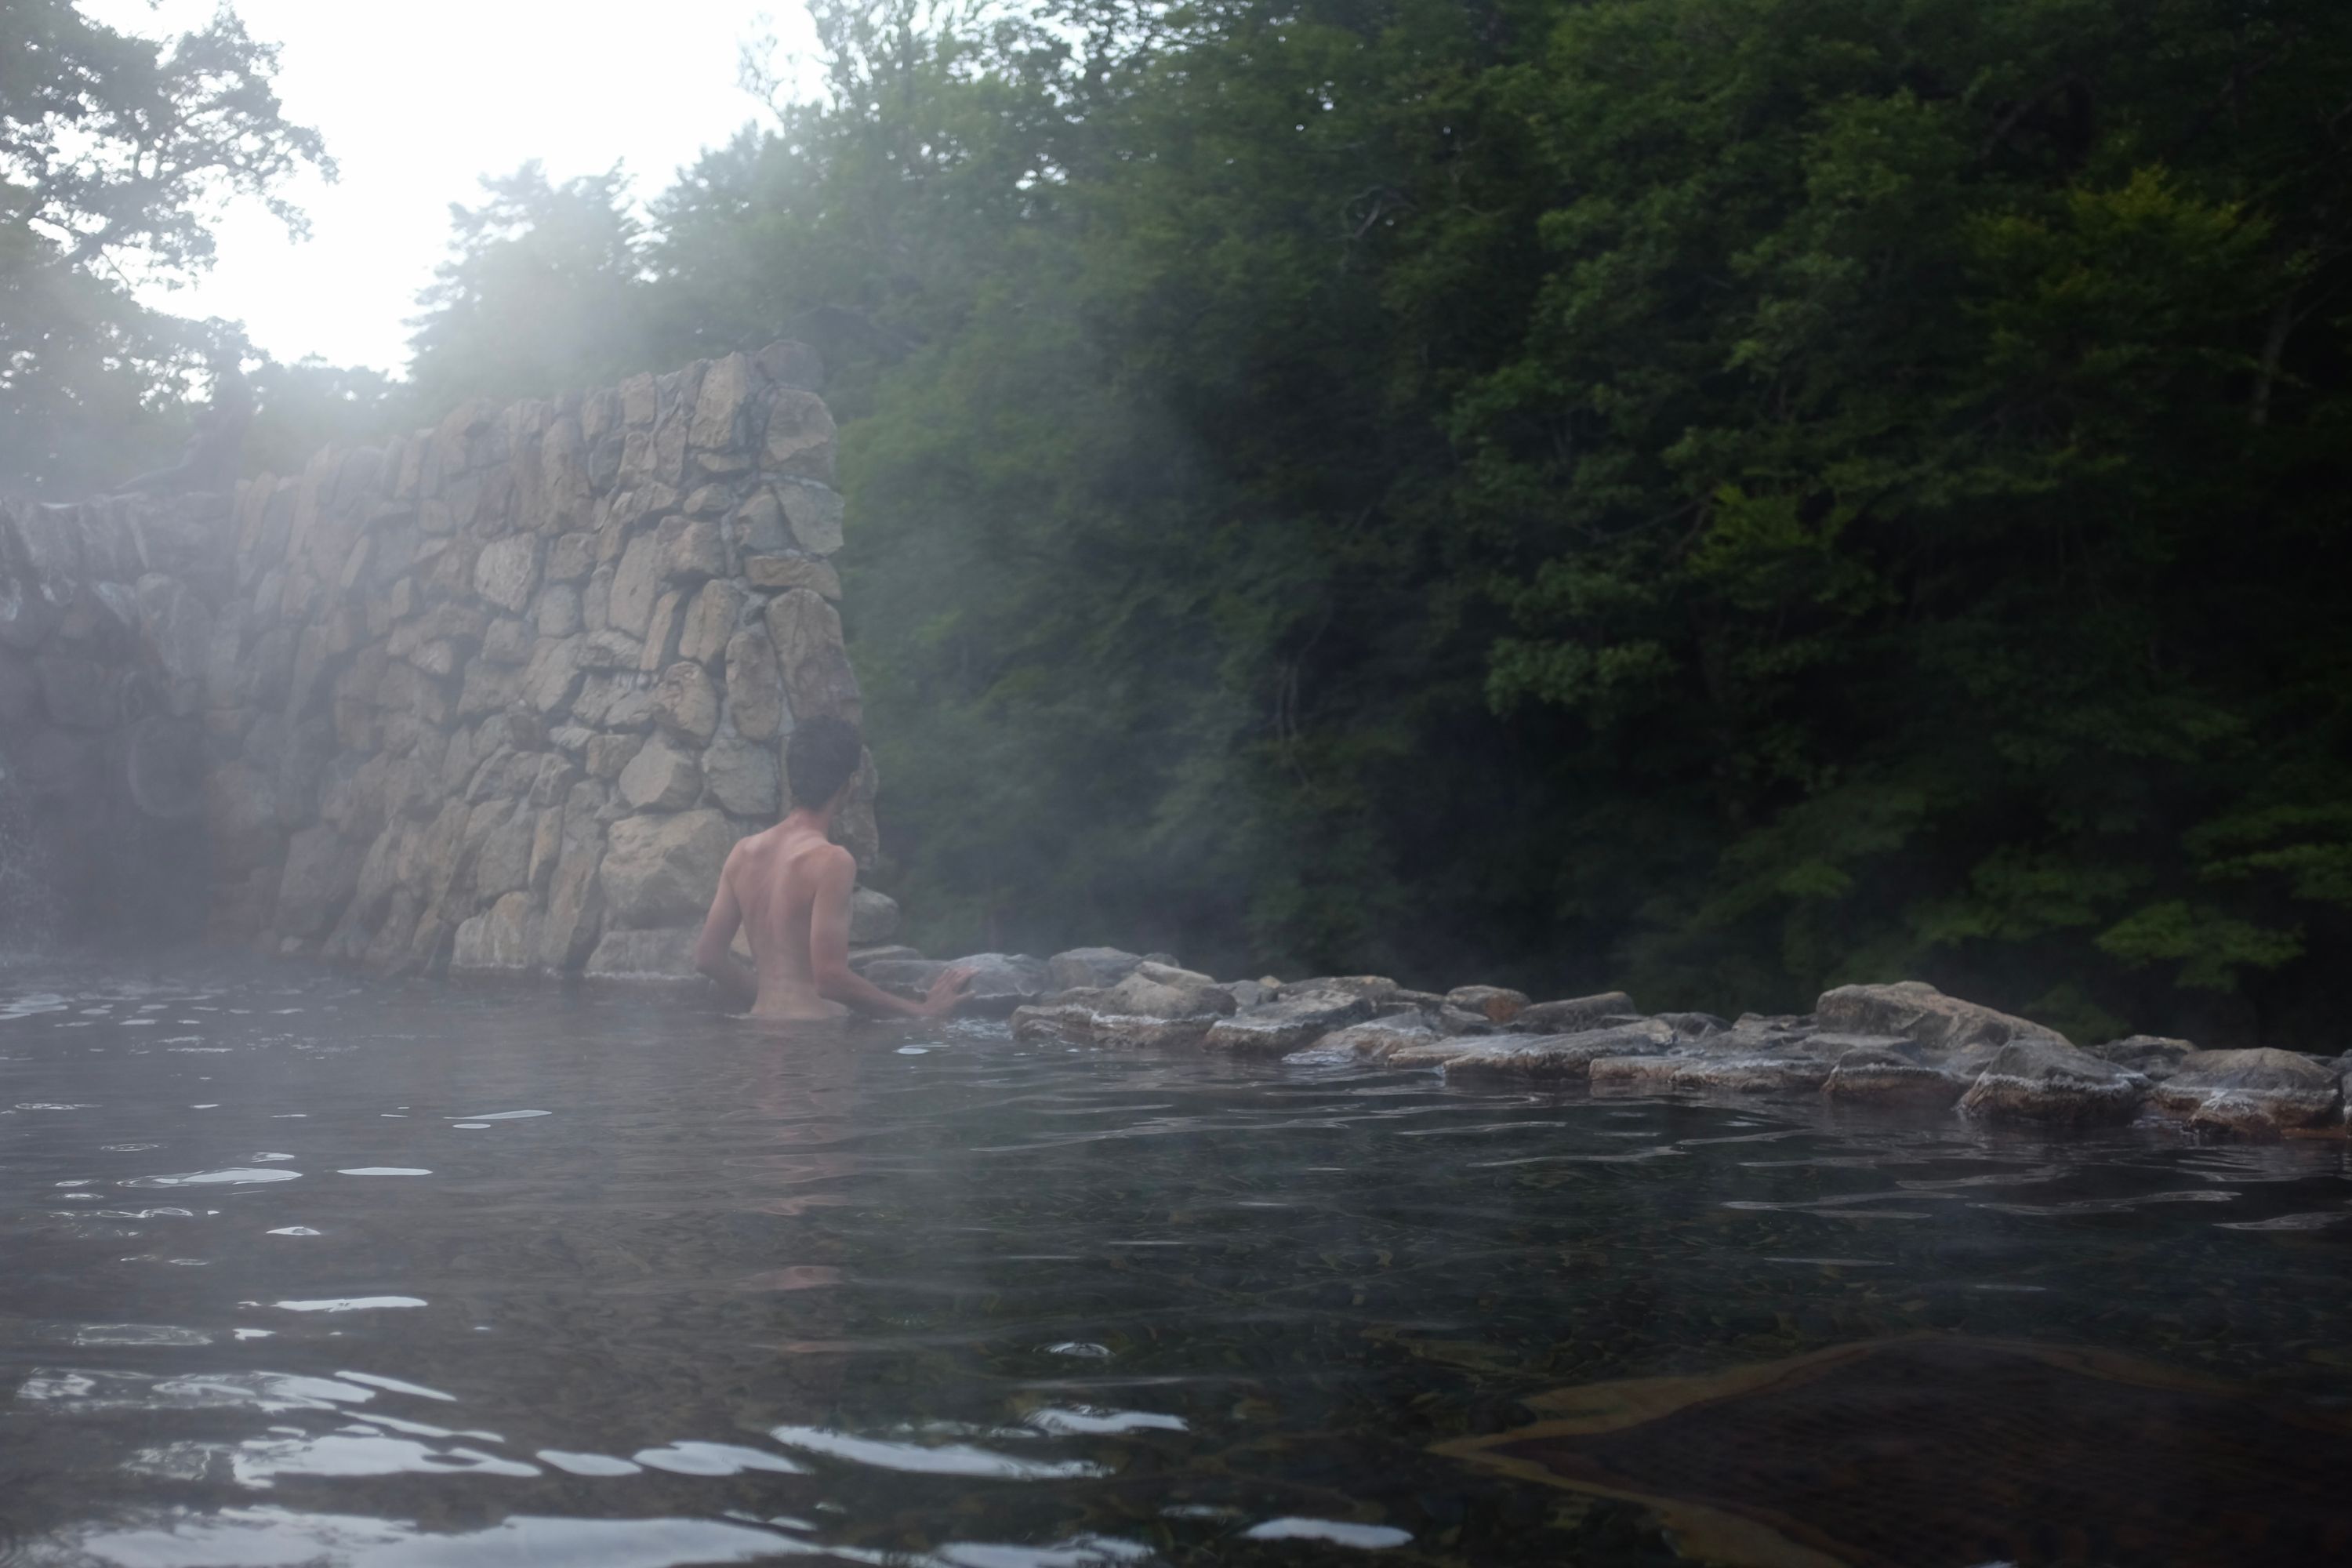 Facing away from the camera, the author stands naked in an outside bath in the forest, visible from the waist above.